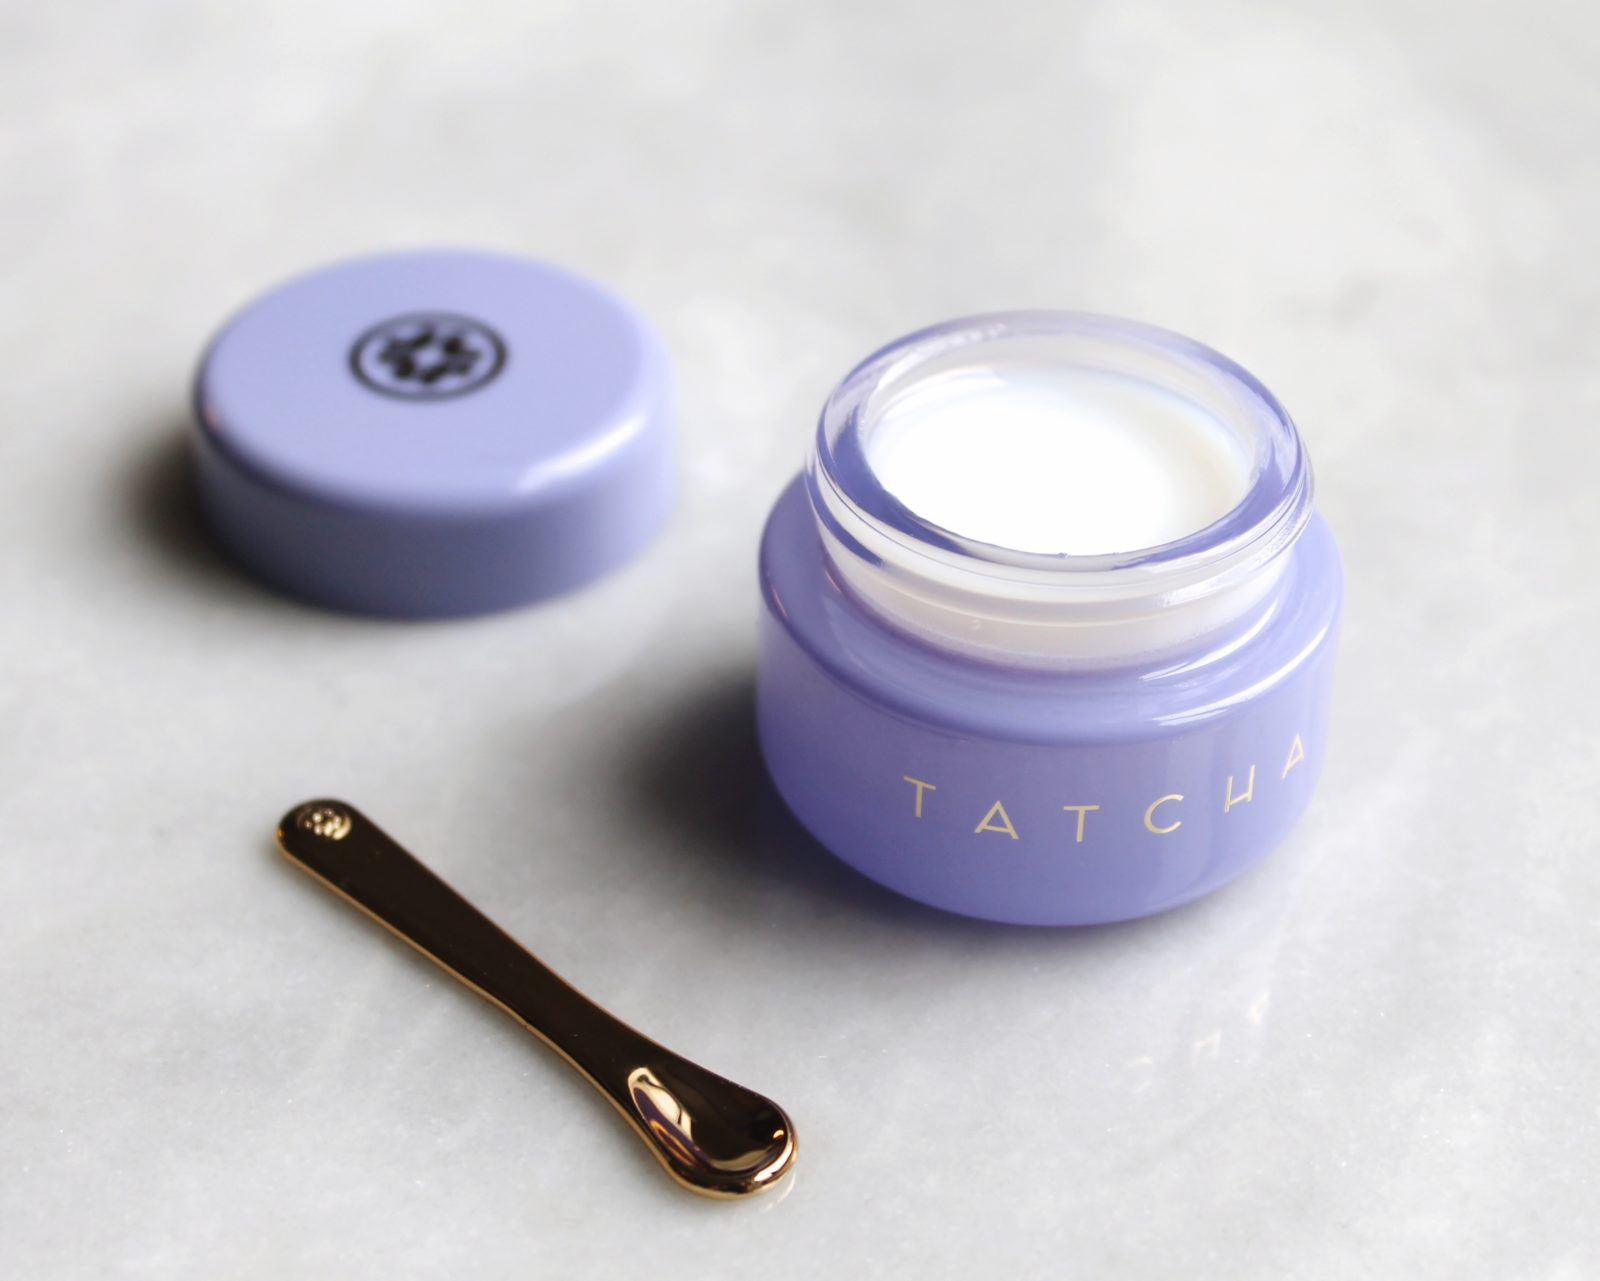 Tatcha Overnight Memory Serum Concentrate Review